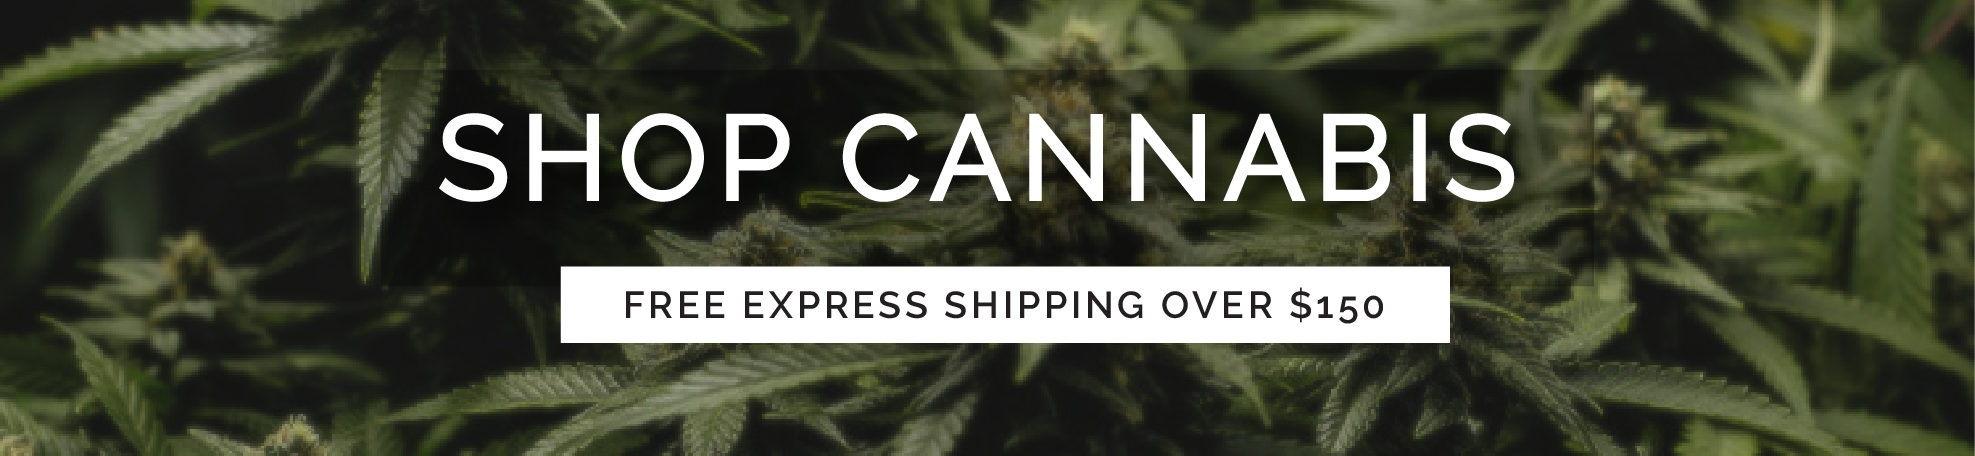 Buy Weed Online banner for wccannabis dispensary for BC cannabis. Budget buds dispensary for weed online Canada.